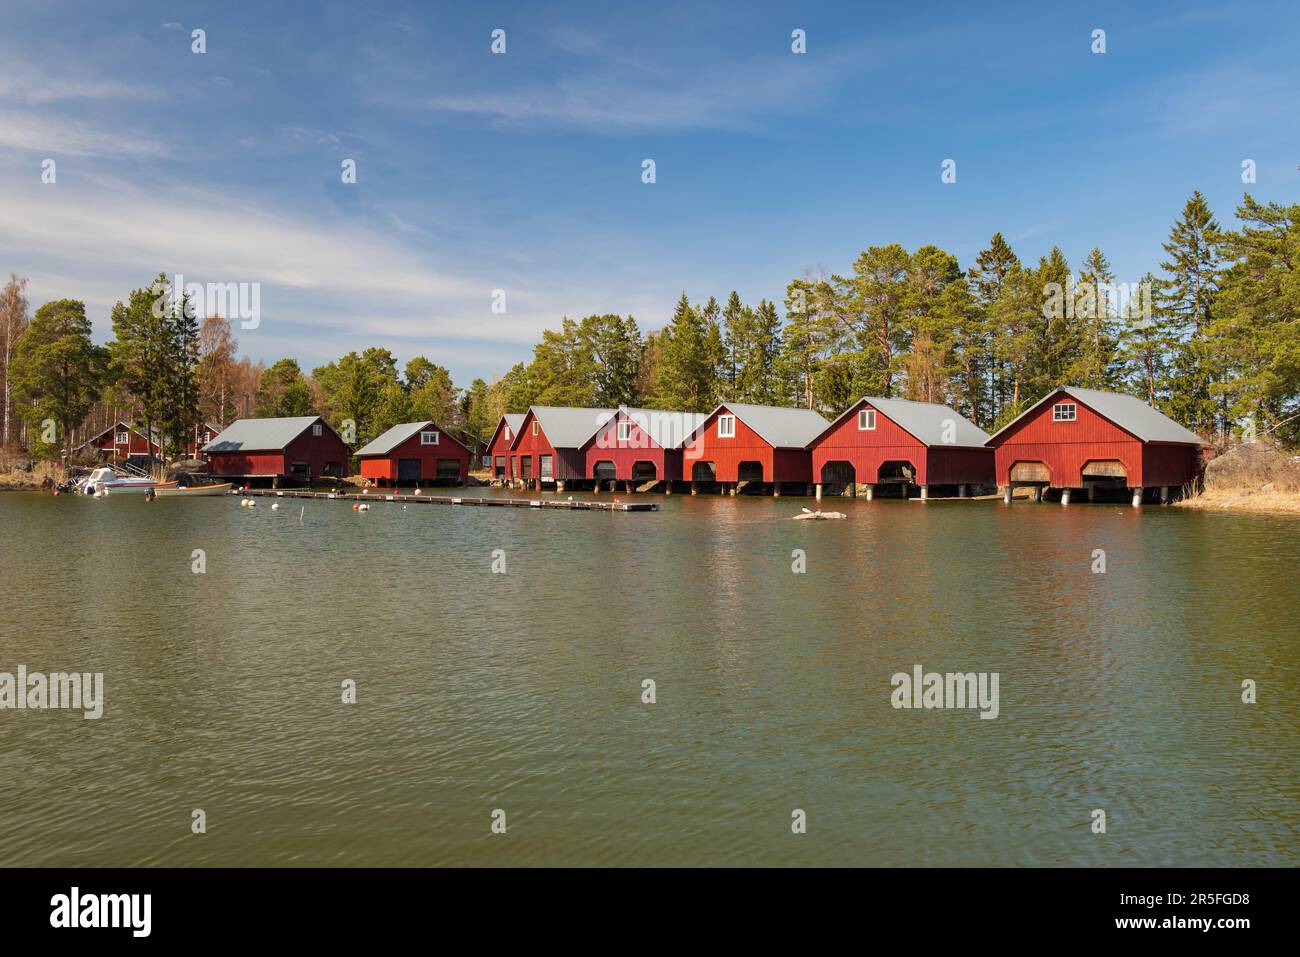 Nice red boathouses in a small bay by the Trollharen fishing location in Ljusne Halsingland Sweden with forest and a blue sky in background. Stock Photo